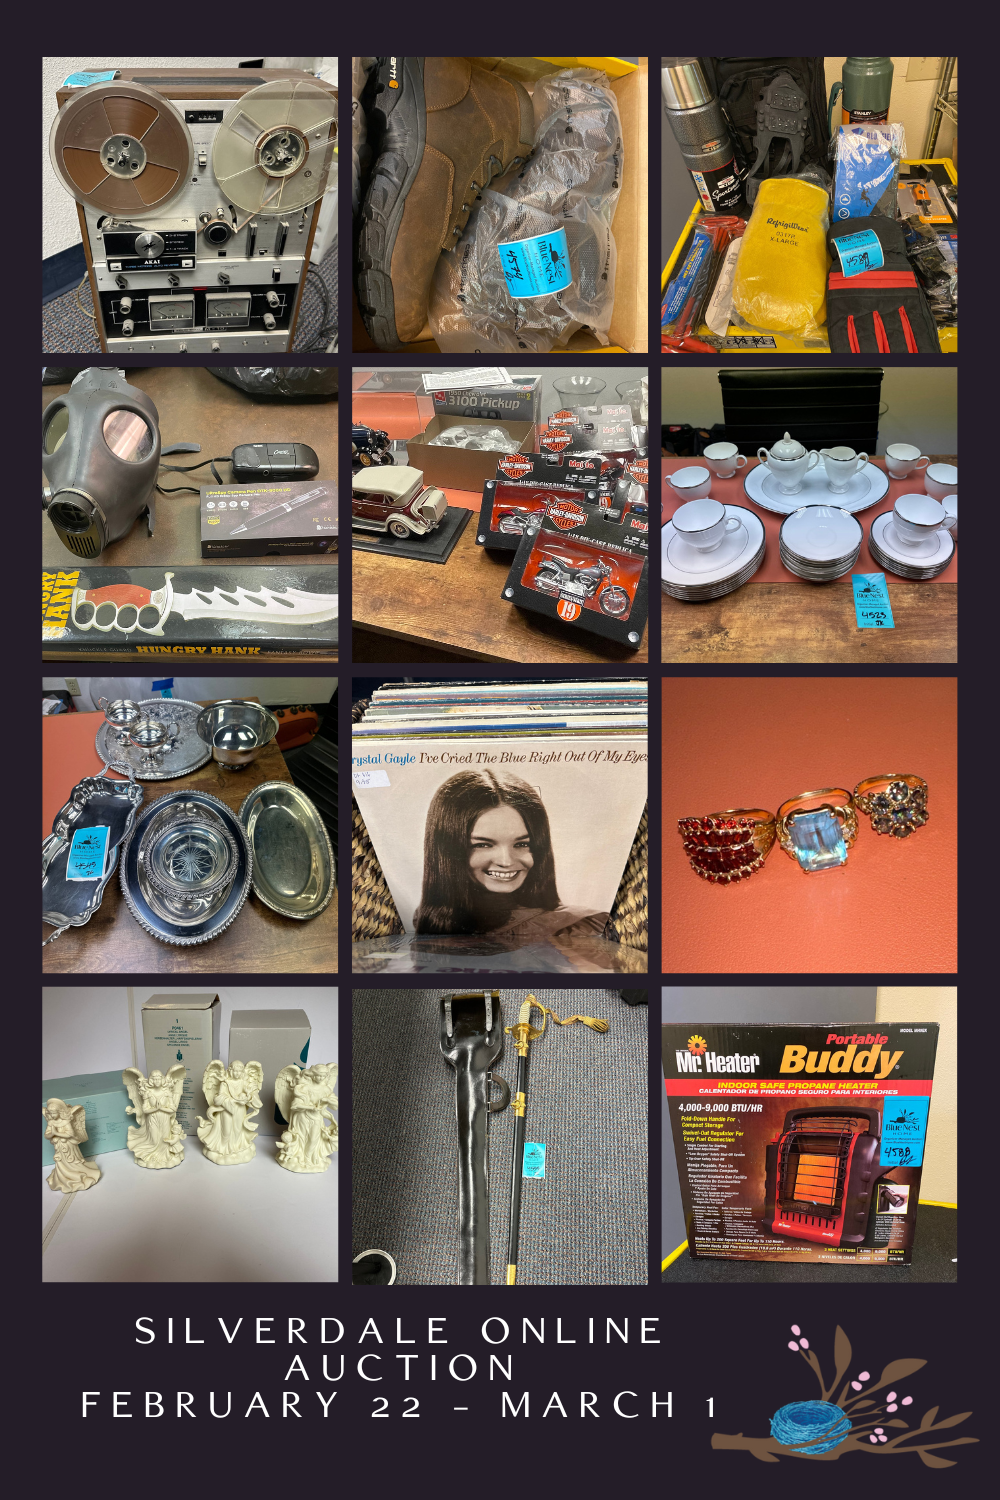 Online Auction featuring vintage records, vintage Navy sword, survivalist gear, camping gear, Harley Davidson die casts, womens jewelry, heater, tools, and more.